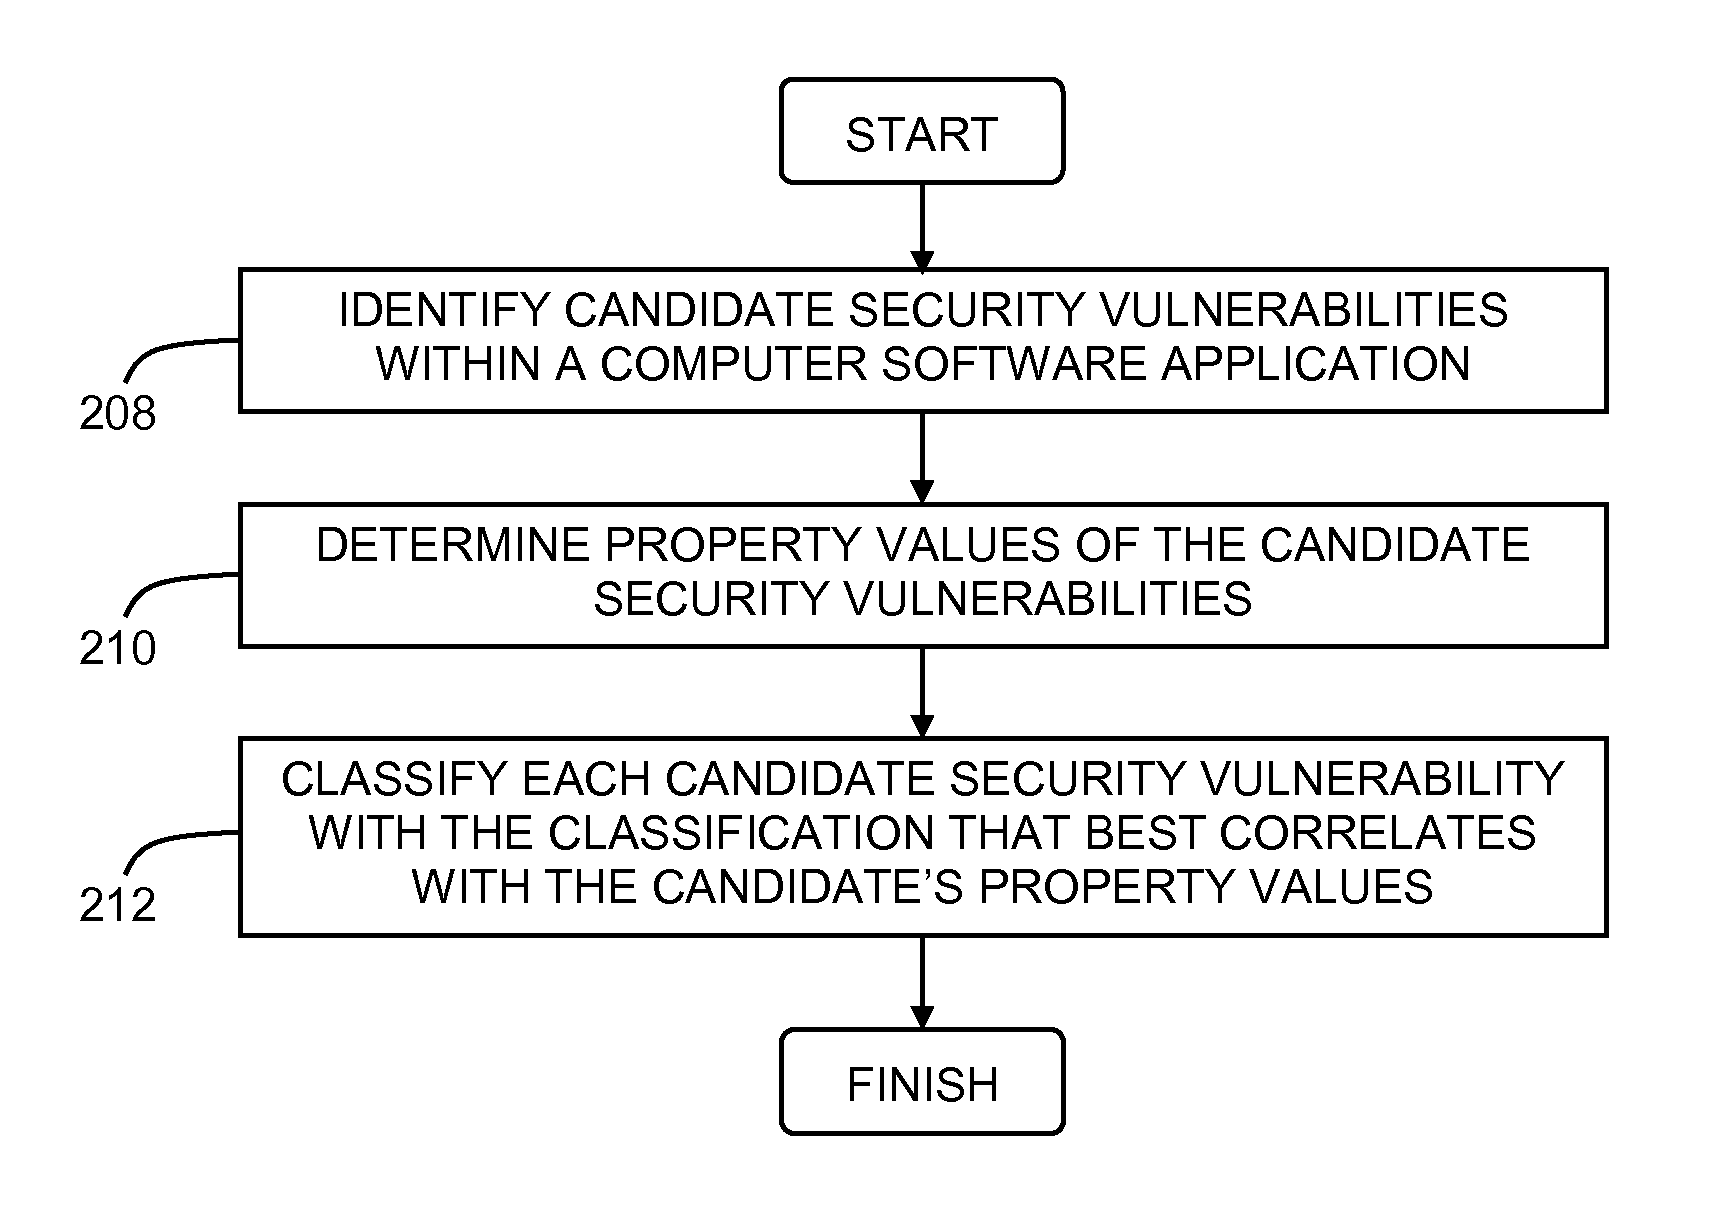 Automatic classification of security vulnerabilities in computer software applications